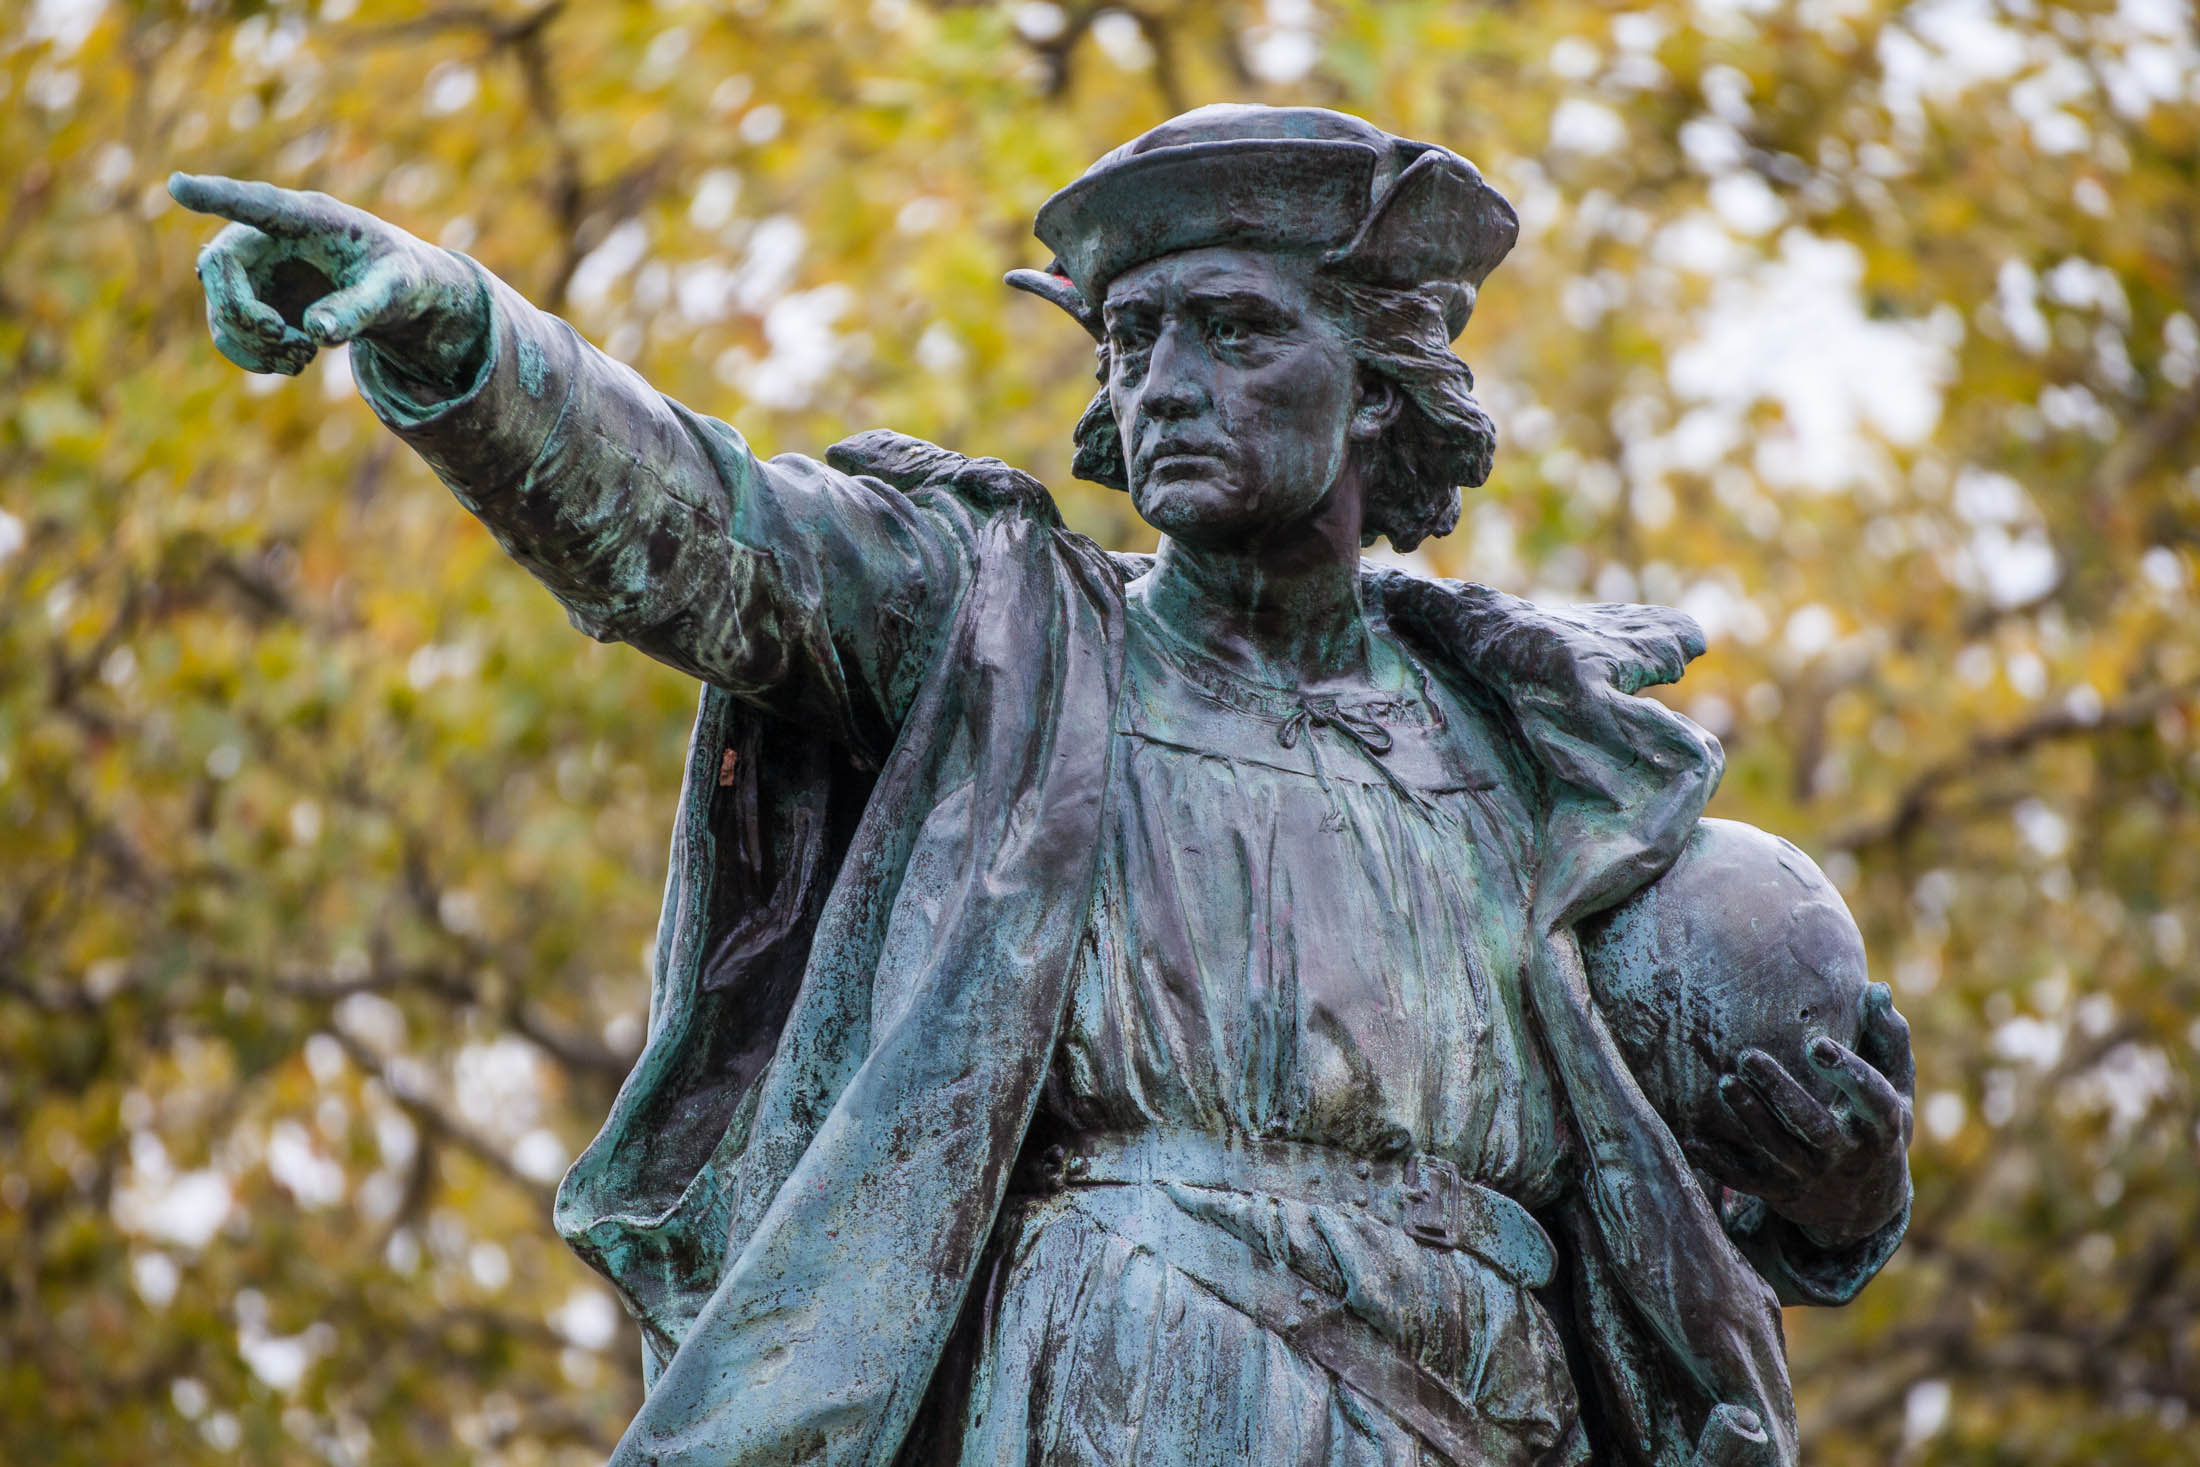 Columbus statues vandalized on US holiday named for him